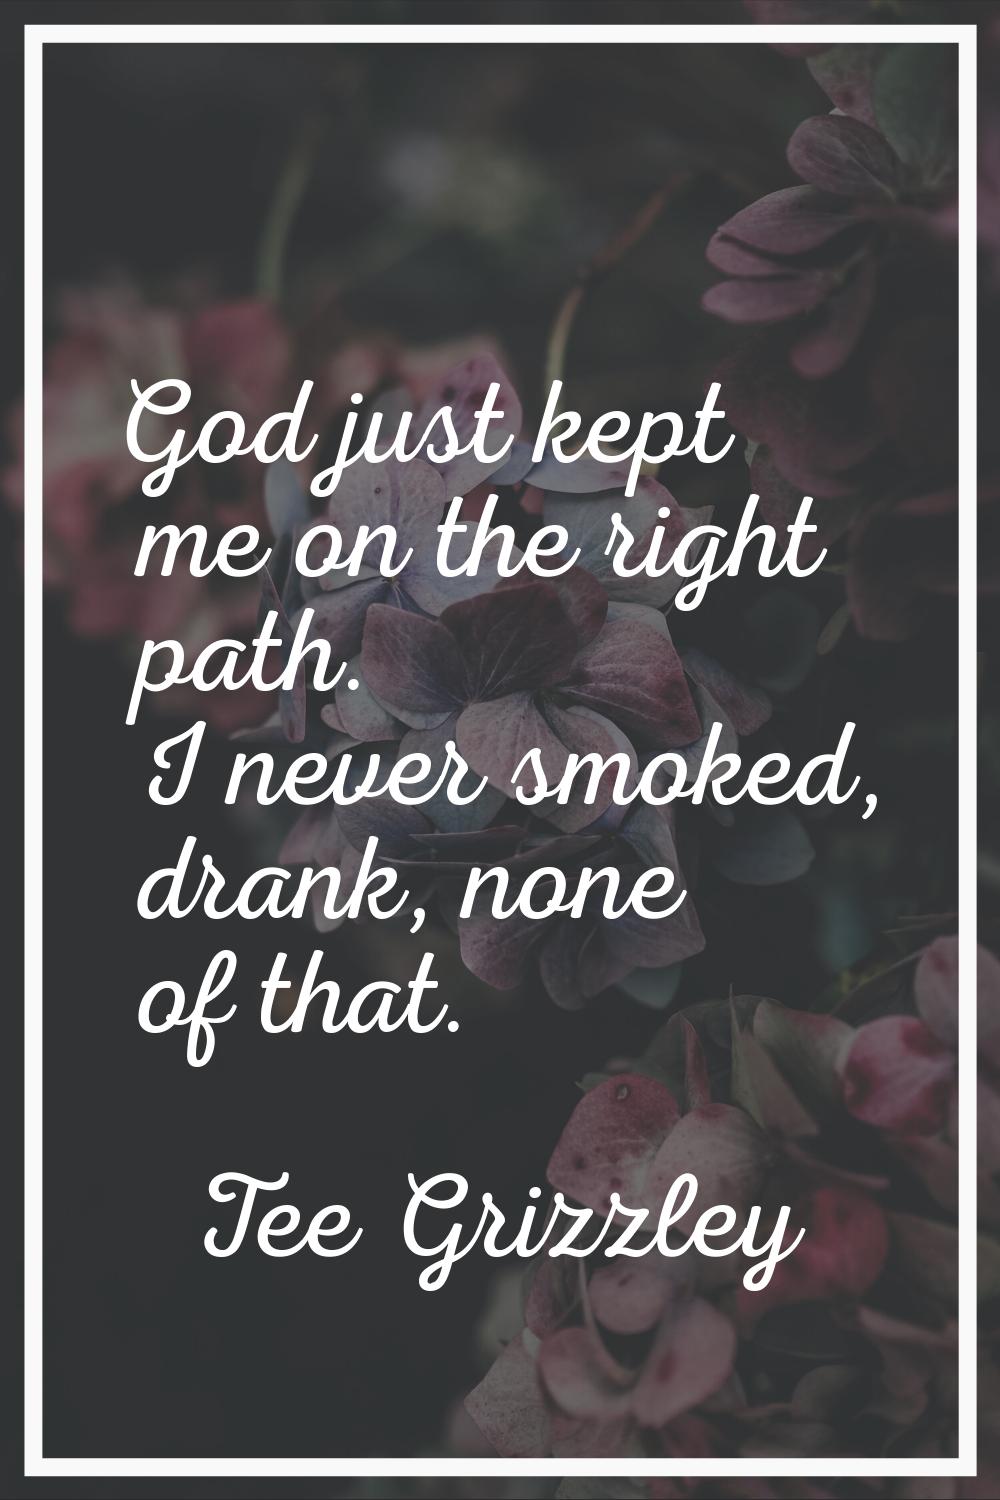 God just kept me on the right path. I never smoked, drank, none of that.